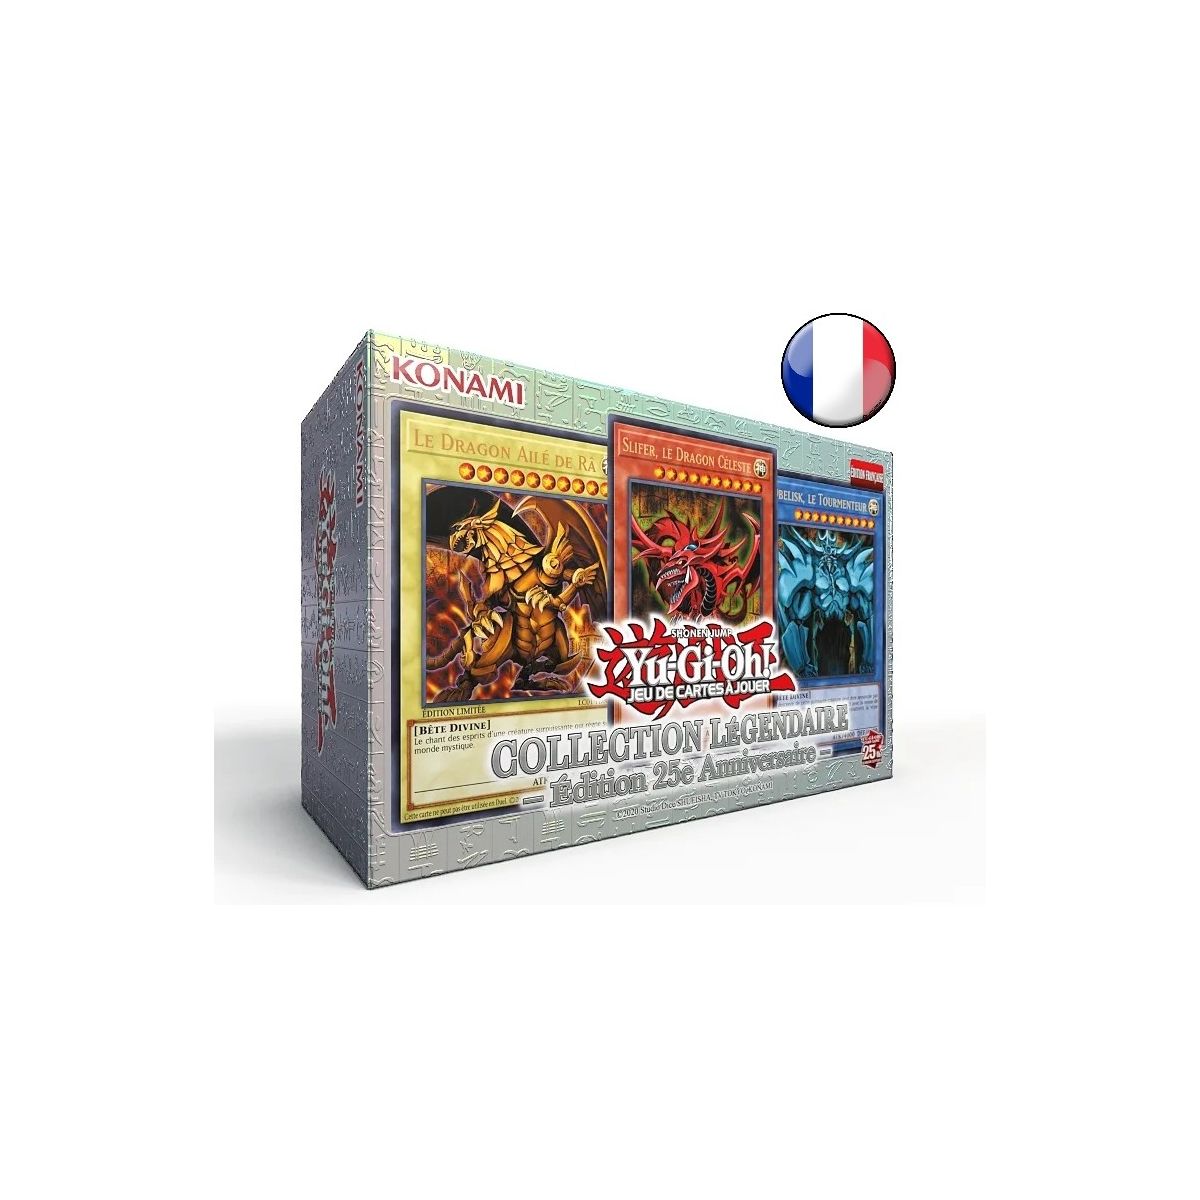 Yu Gi Oh! - Legendary Collection 25th Anniversary Box - Legendary Collection 25th Anniversary - FR